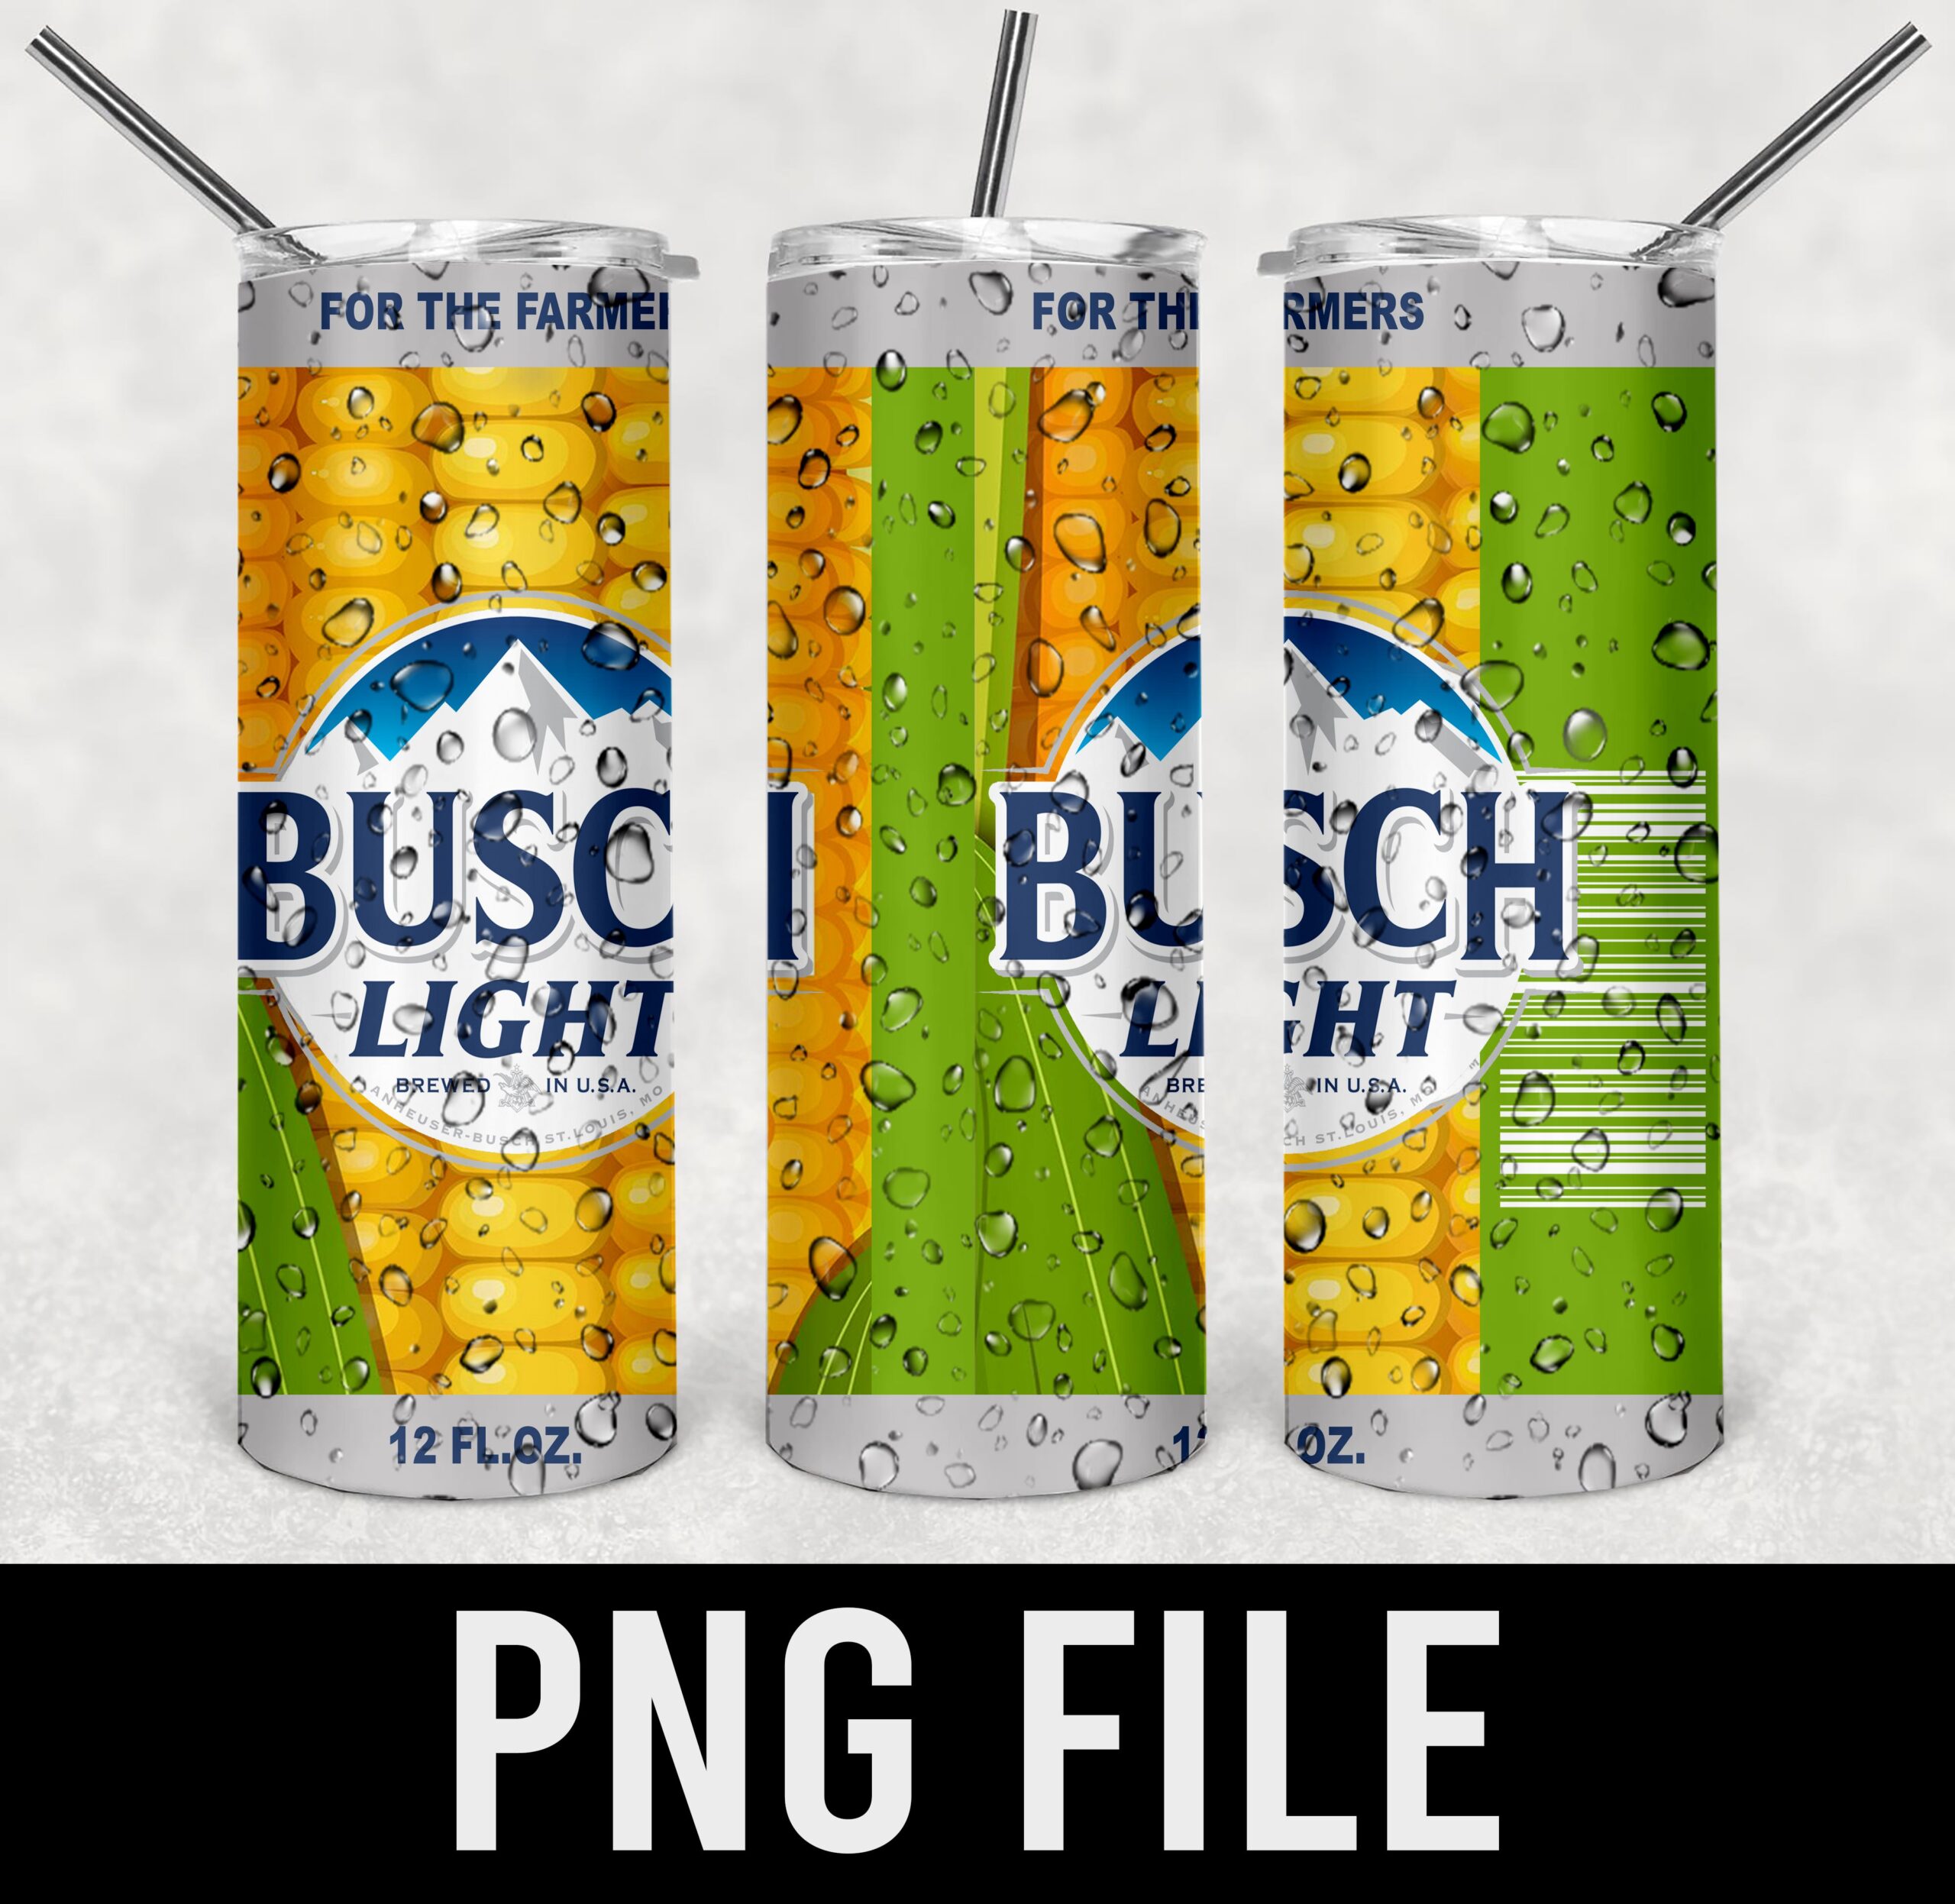 Busch light for the farmer-corn-PNG DIGITAL DOWNLOAD for